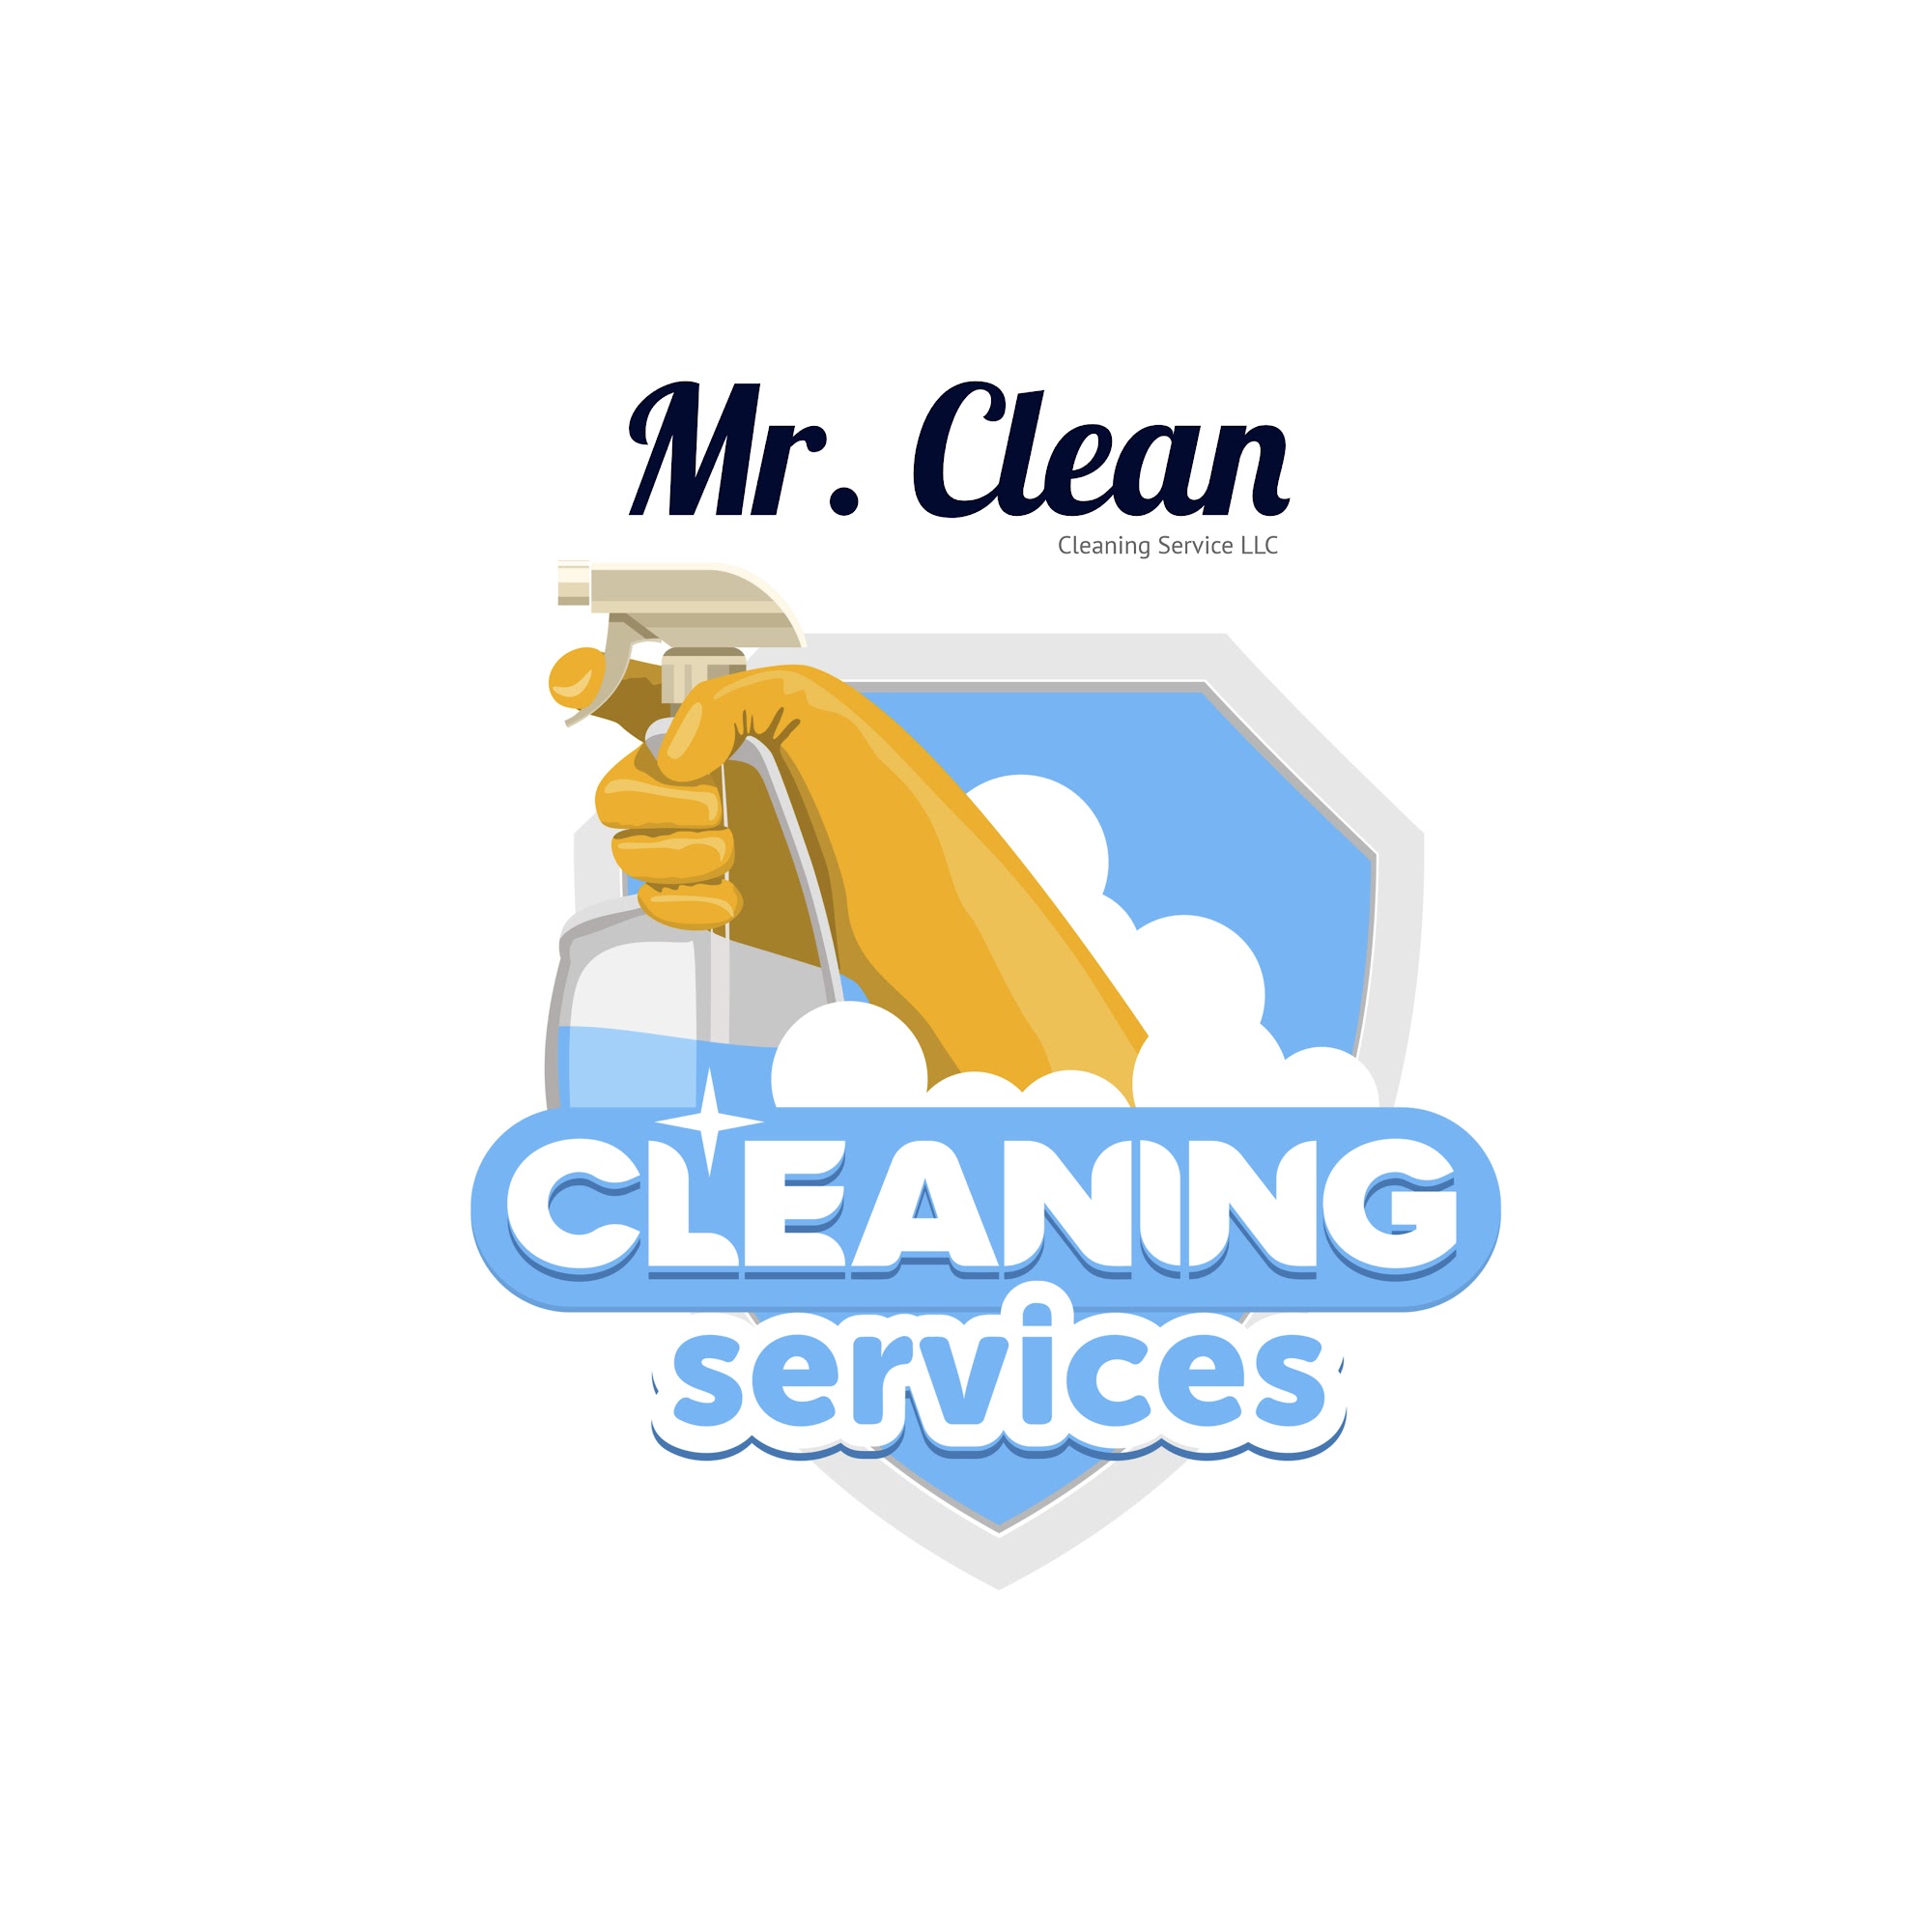 Mr. Clean Cleaning Service LLC